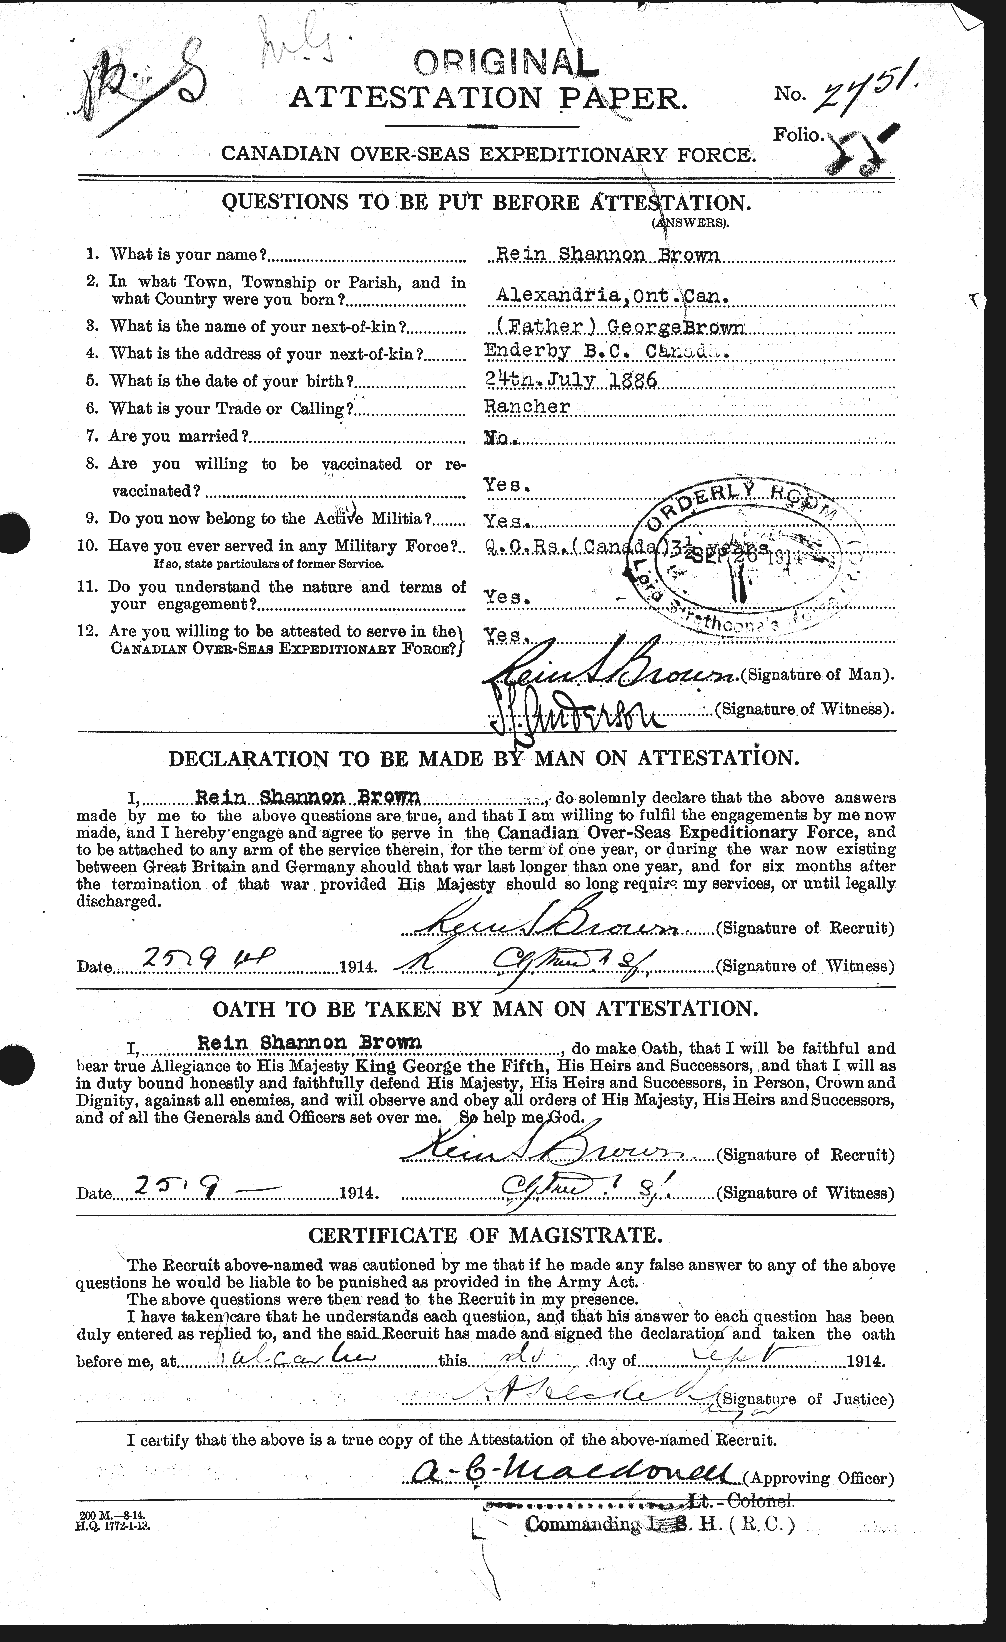 Personnel Records of the First World War - CEF 267256a